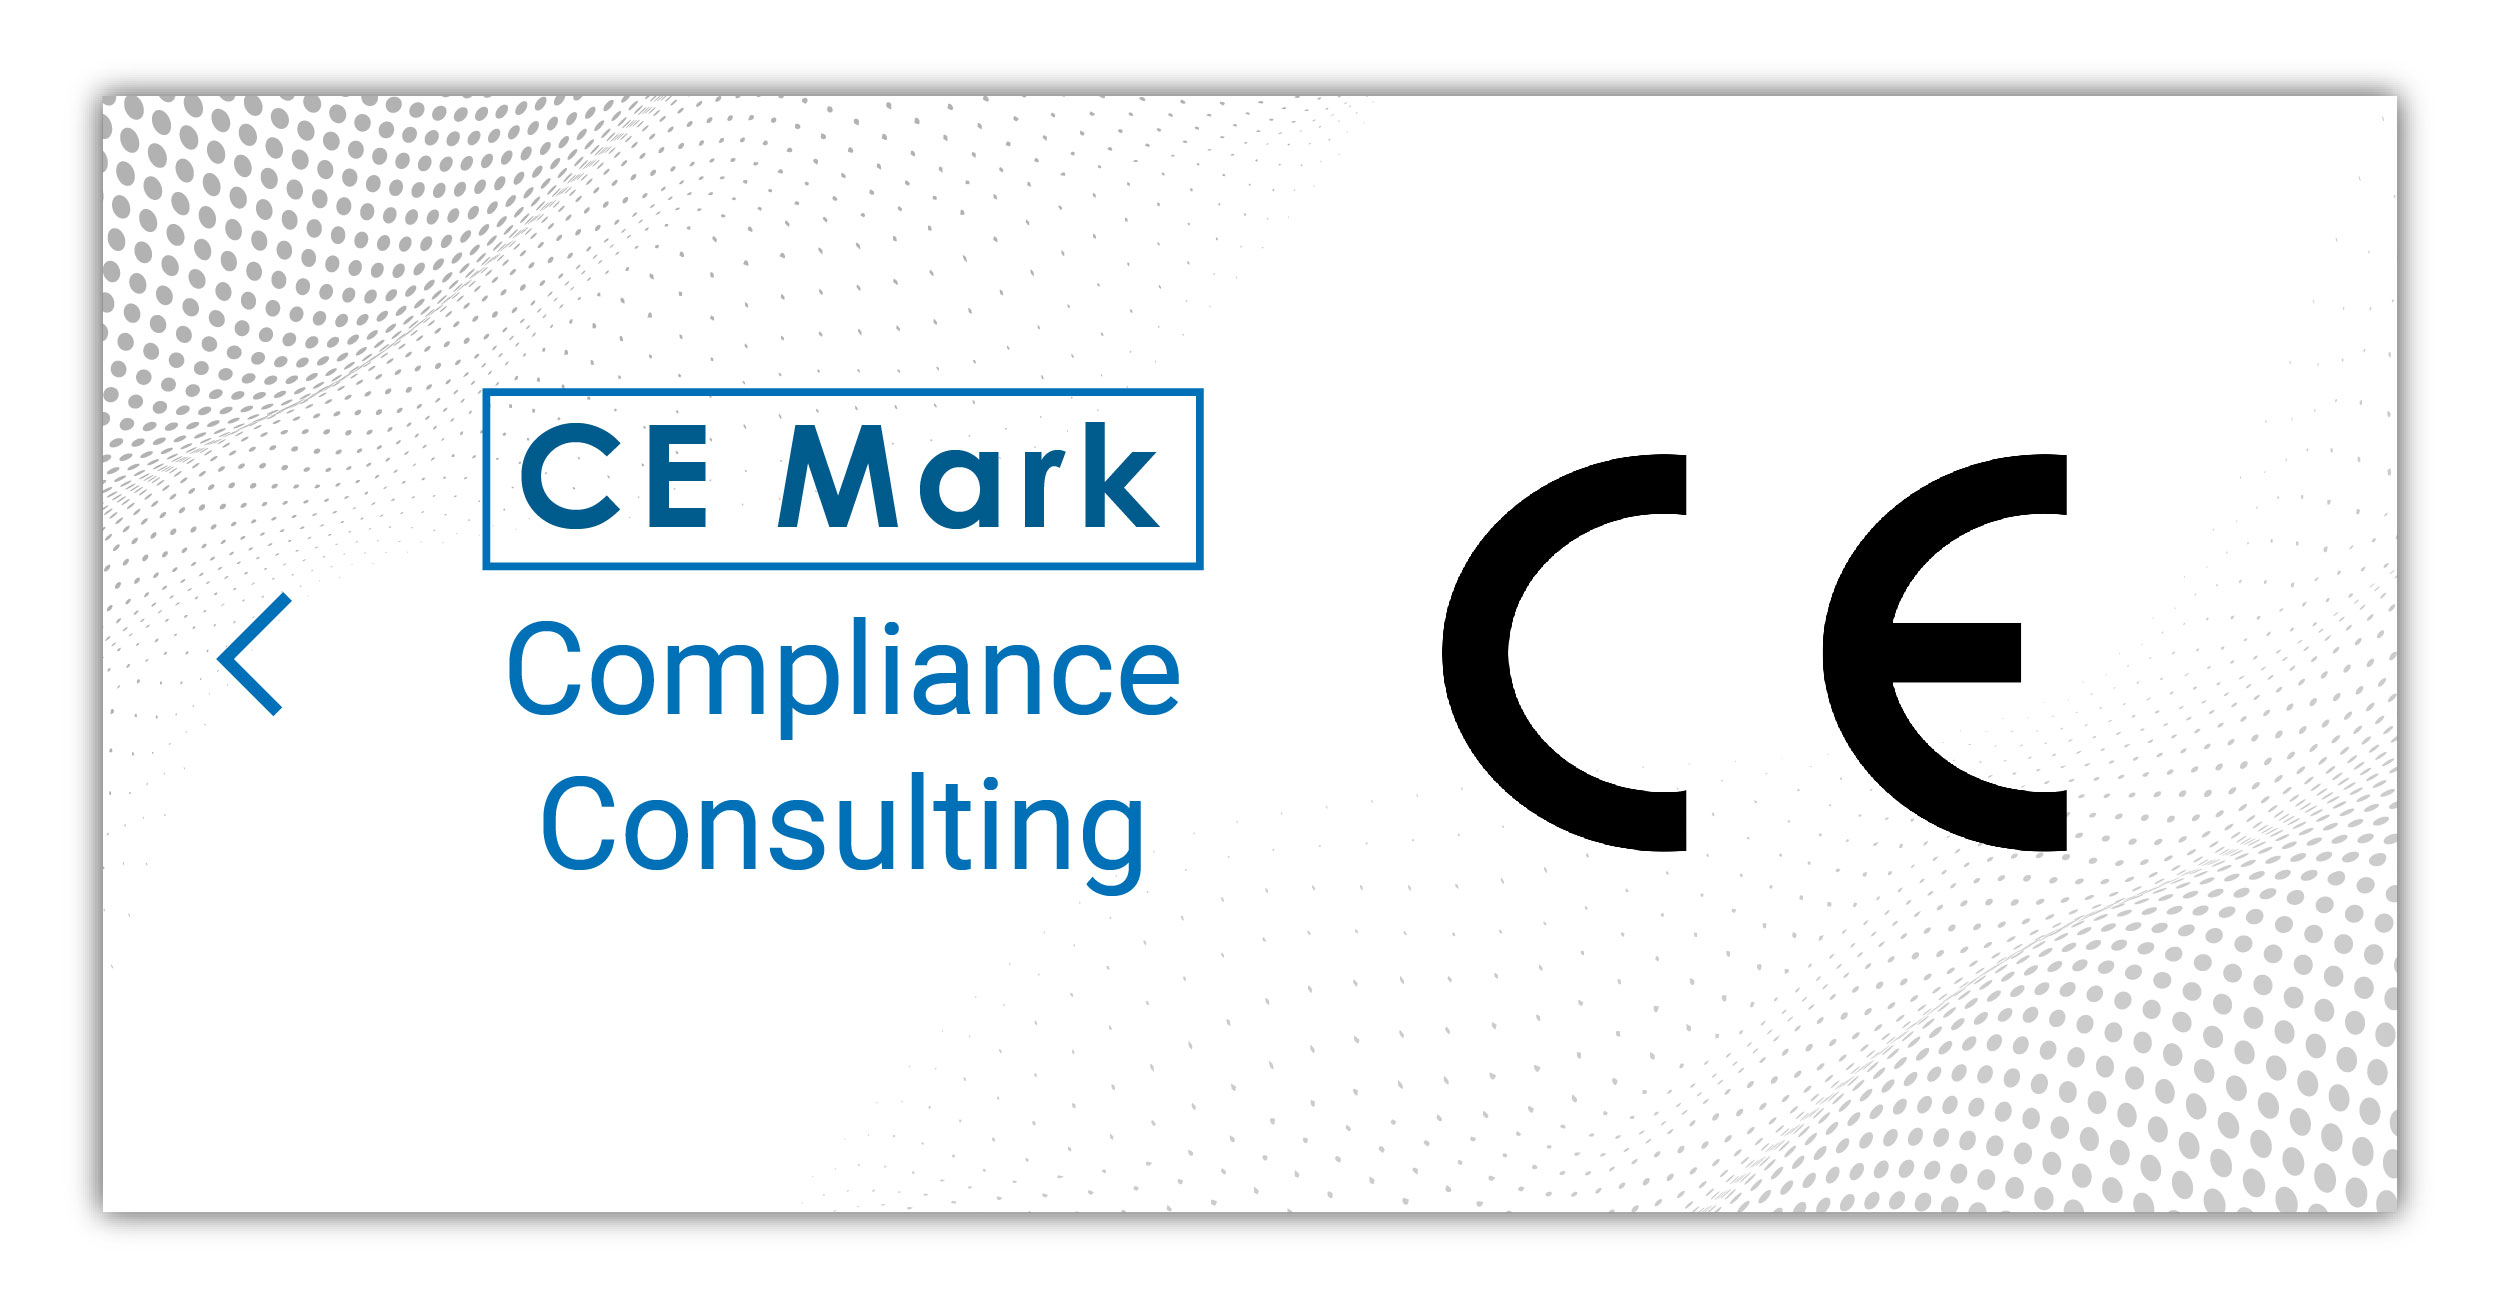 Accelerate Compliance with Medical Device CE Mark: Trusted Consultant